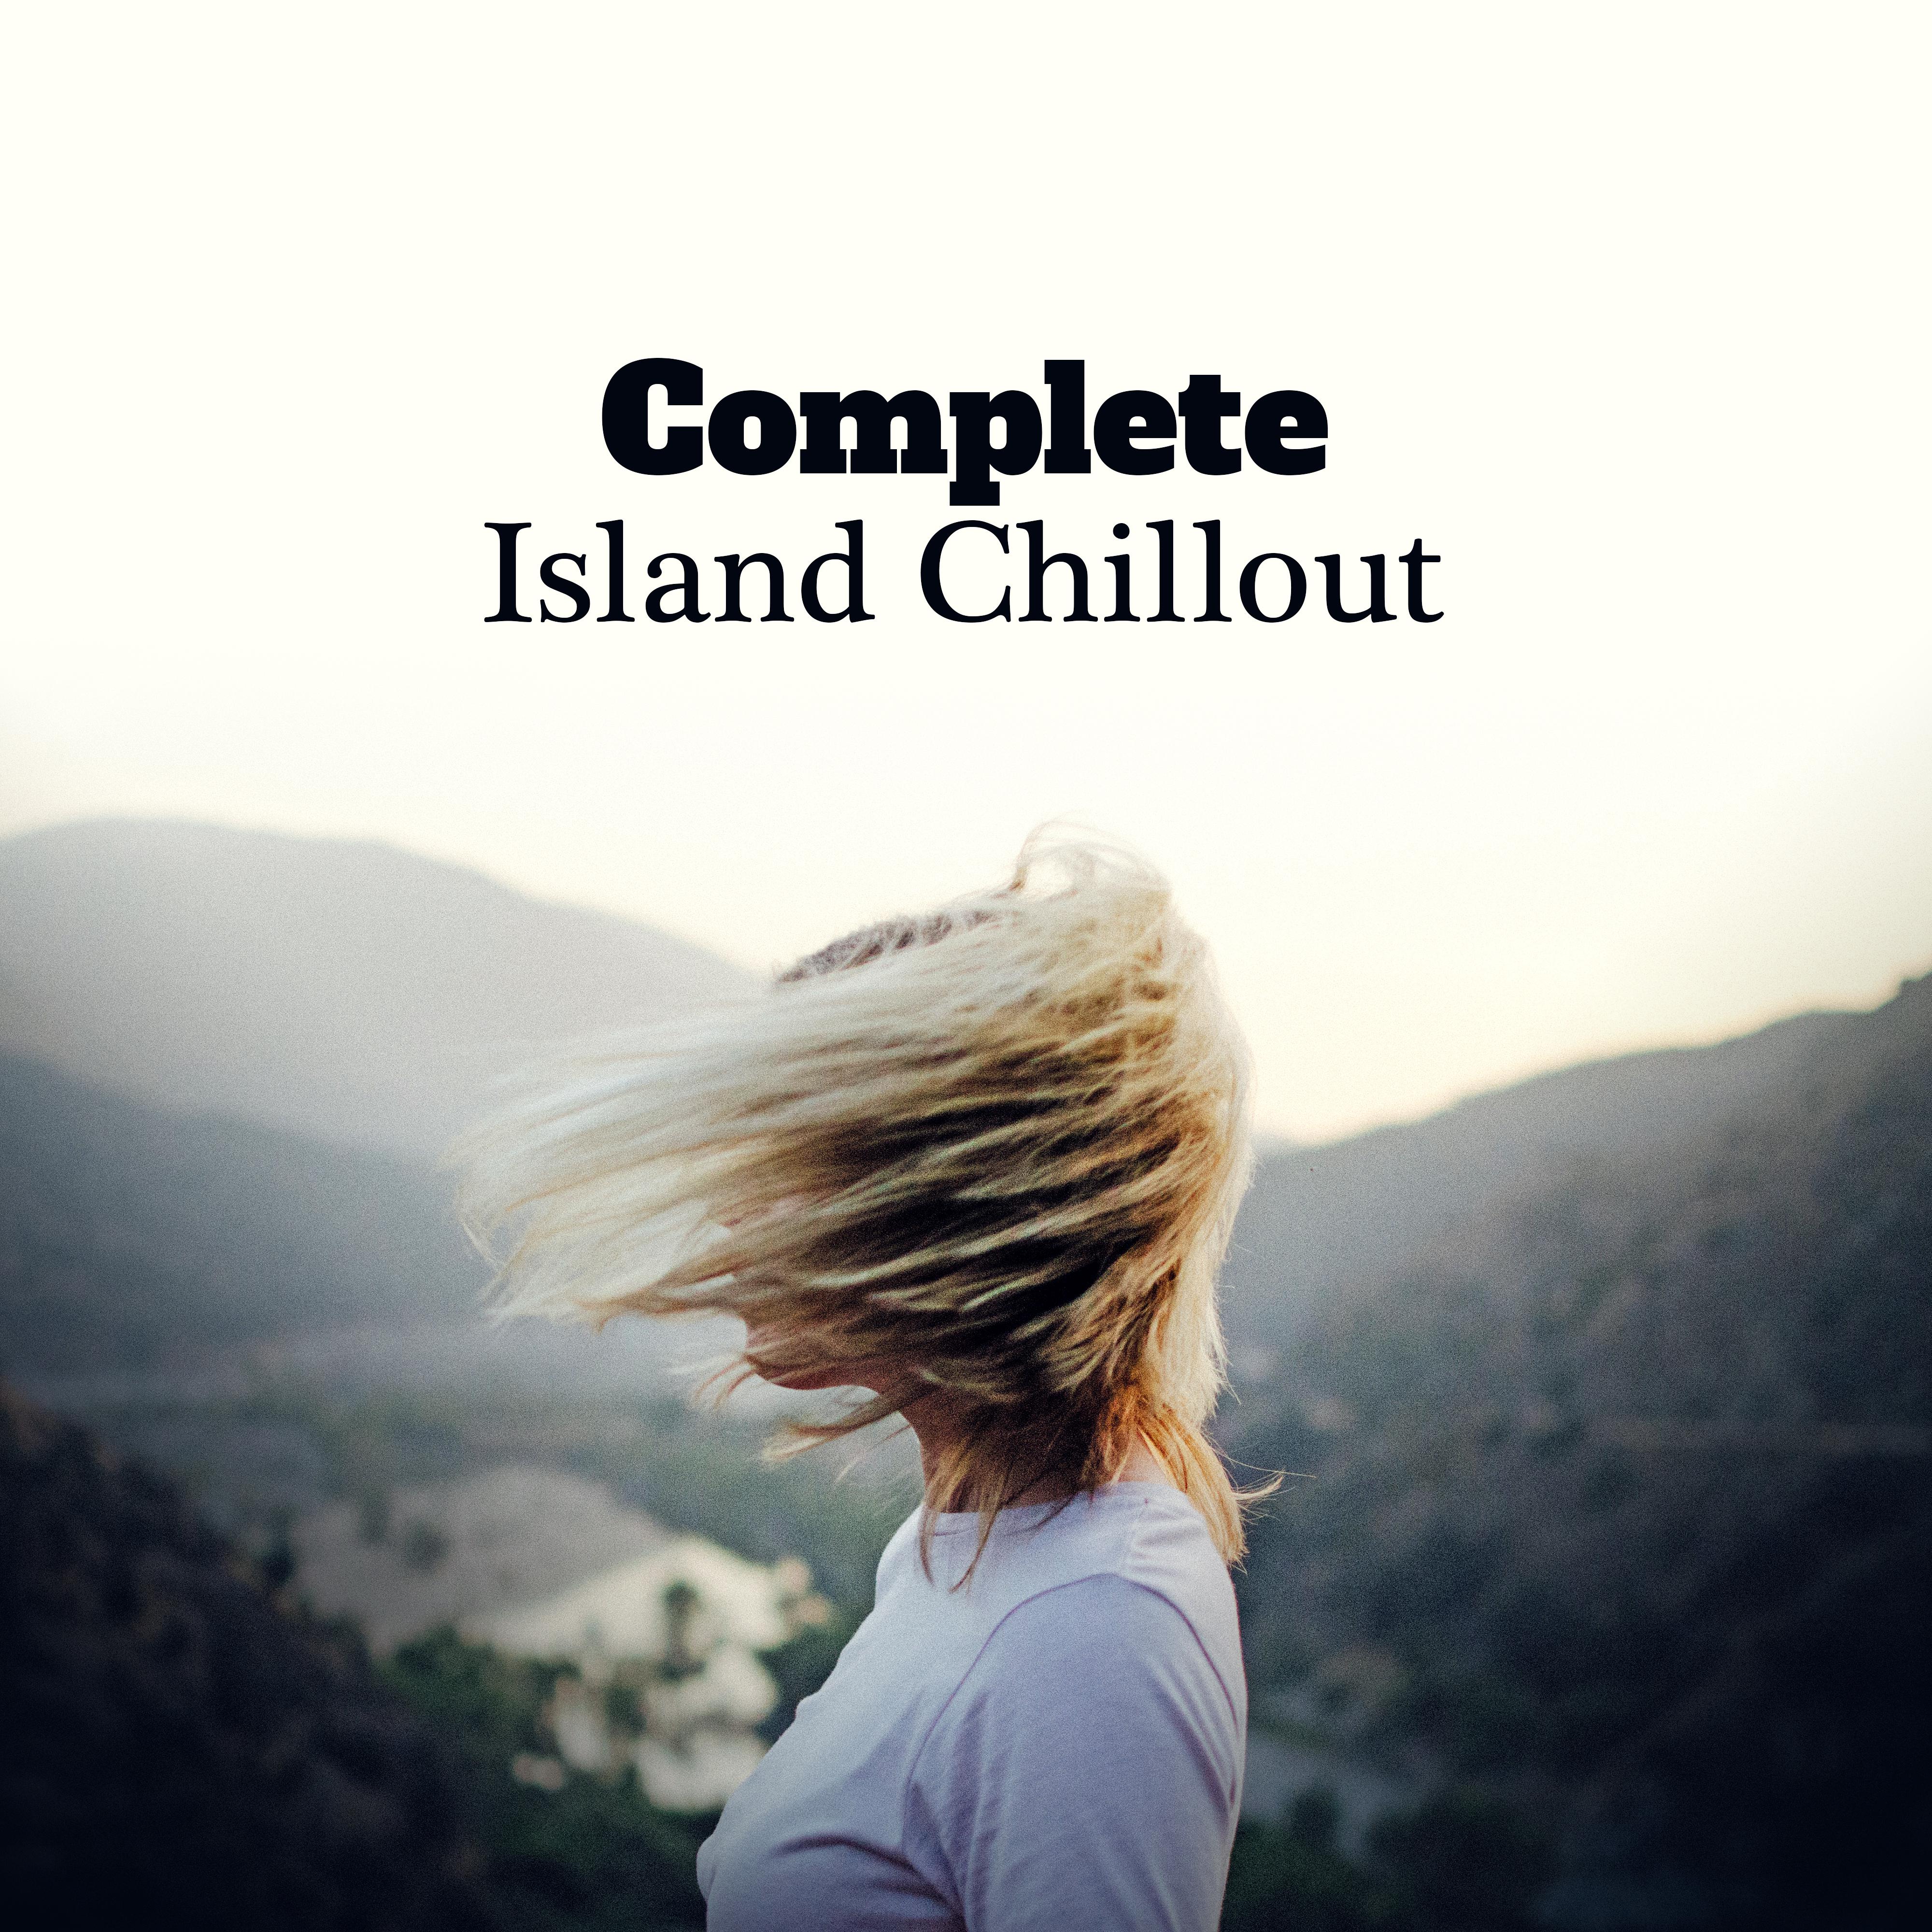 Complete Island Chillout